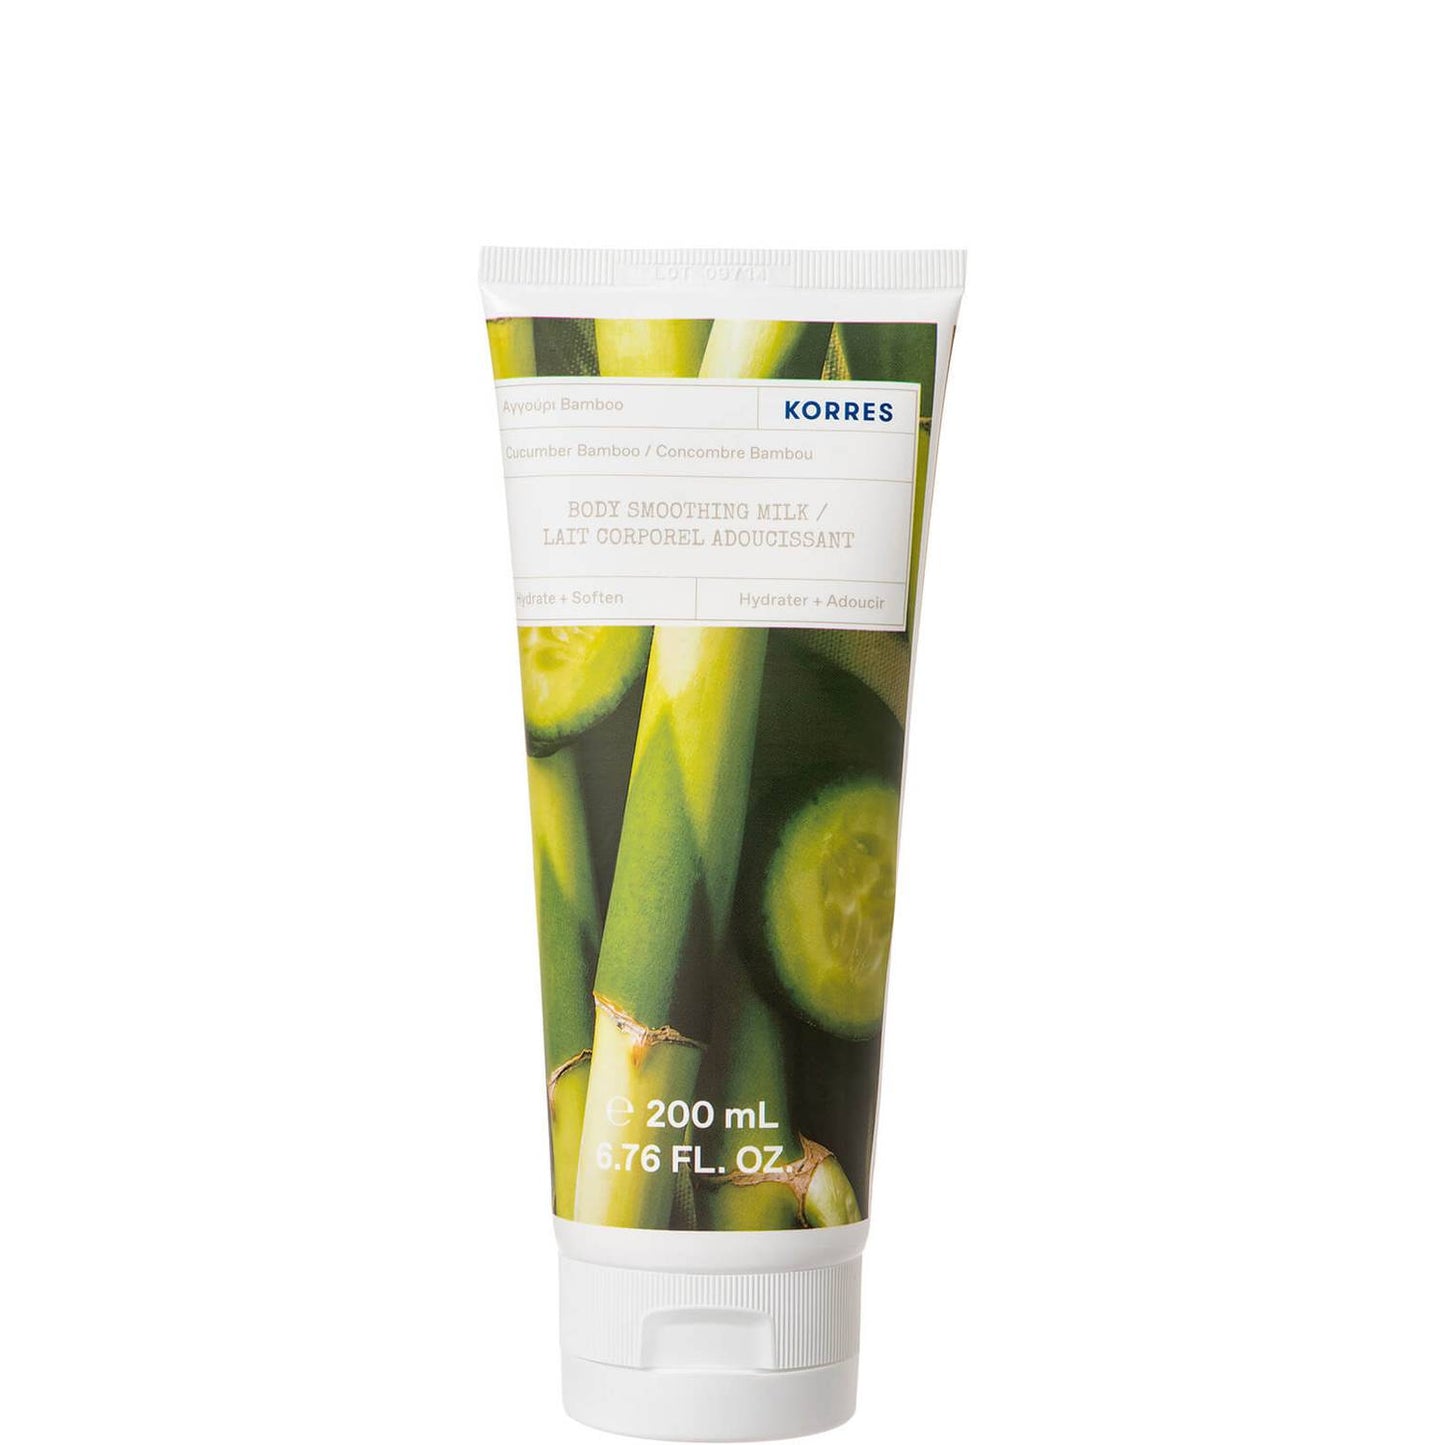 Korres Cucumber Bamboo Body Smoothing Milk is formulated to nourish and deeply condition skin with moisturizing agents such as almond oil and shea butter.